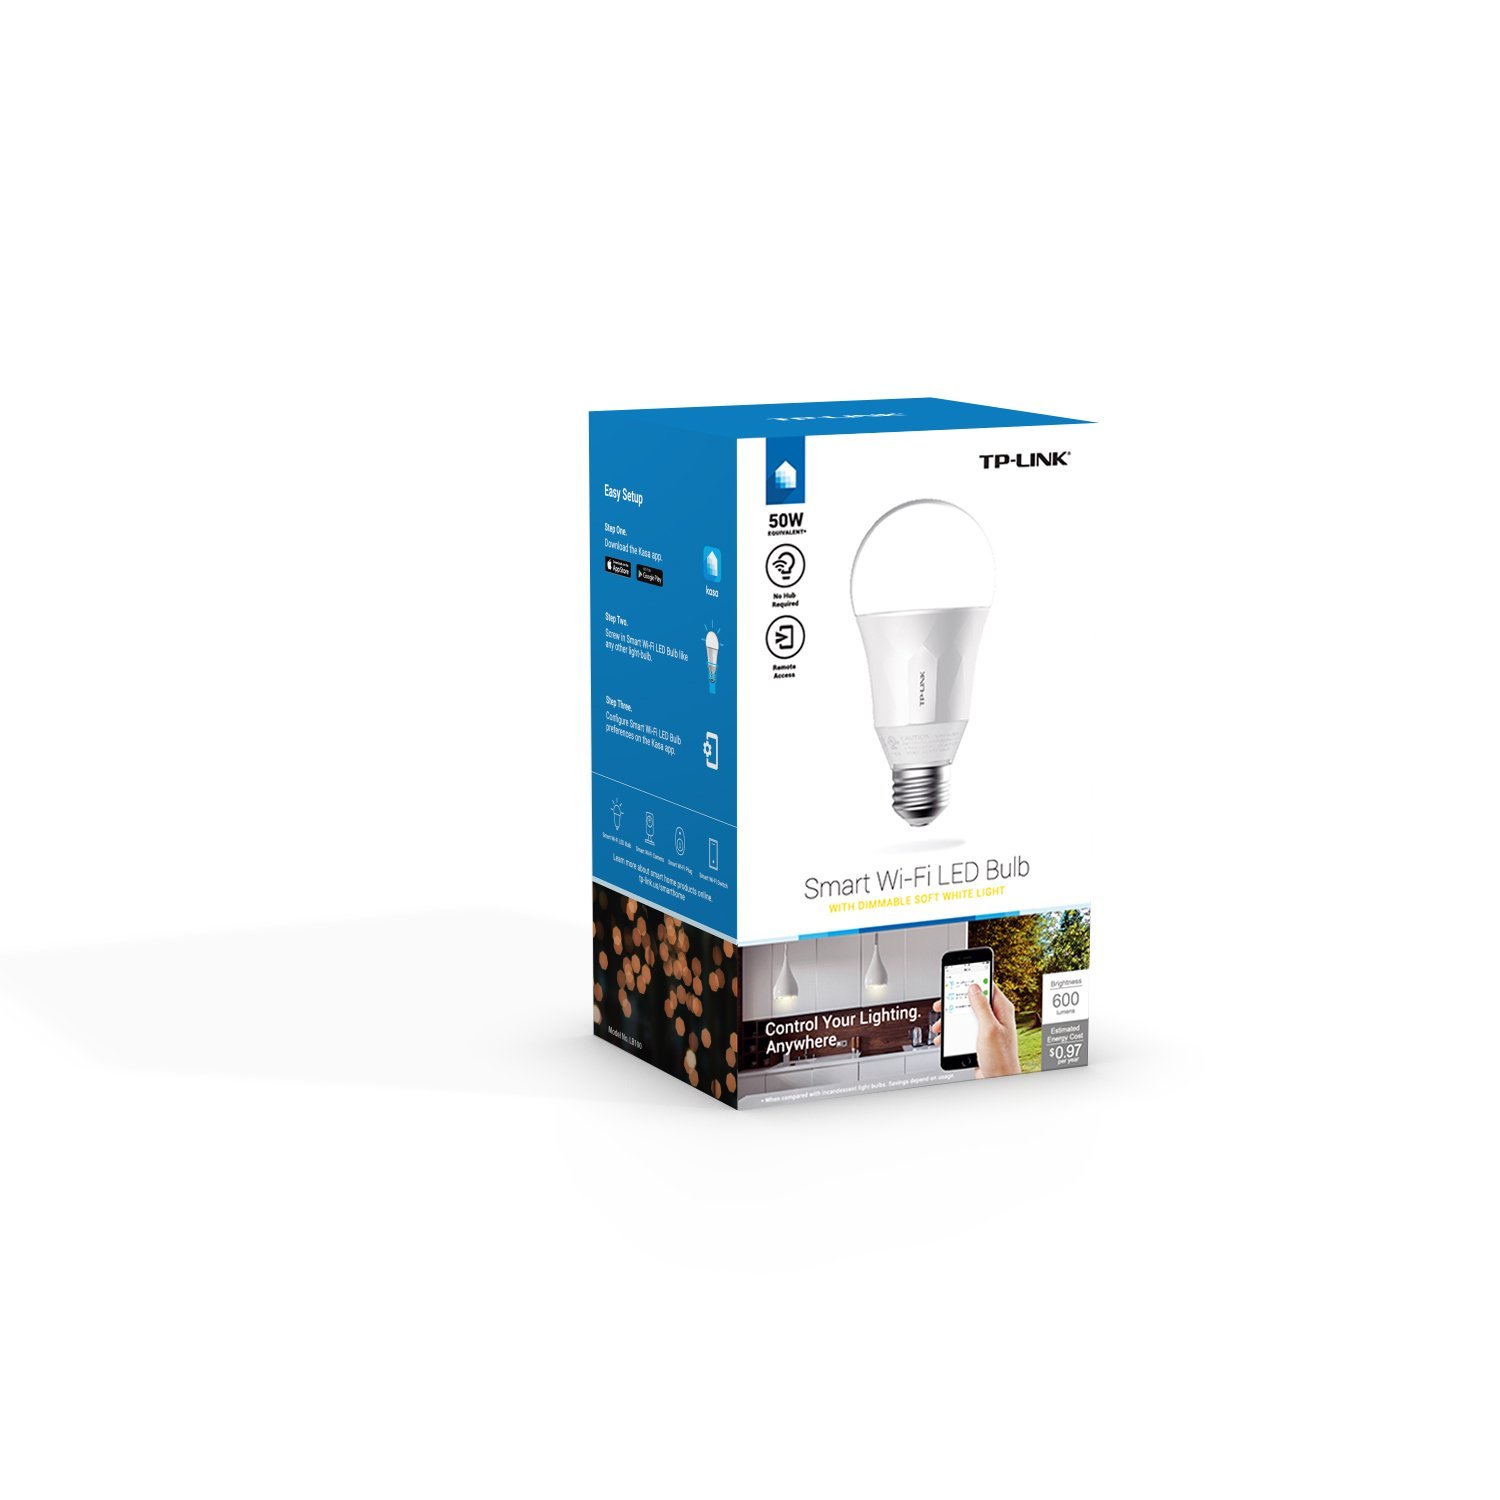 TP-Link Smart LED Light Bulb, Wi-Fi, Dimmable White, 50W Equivalent